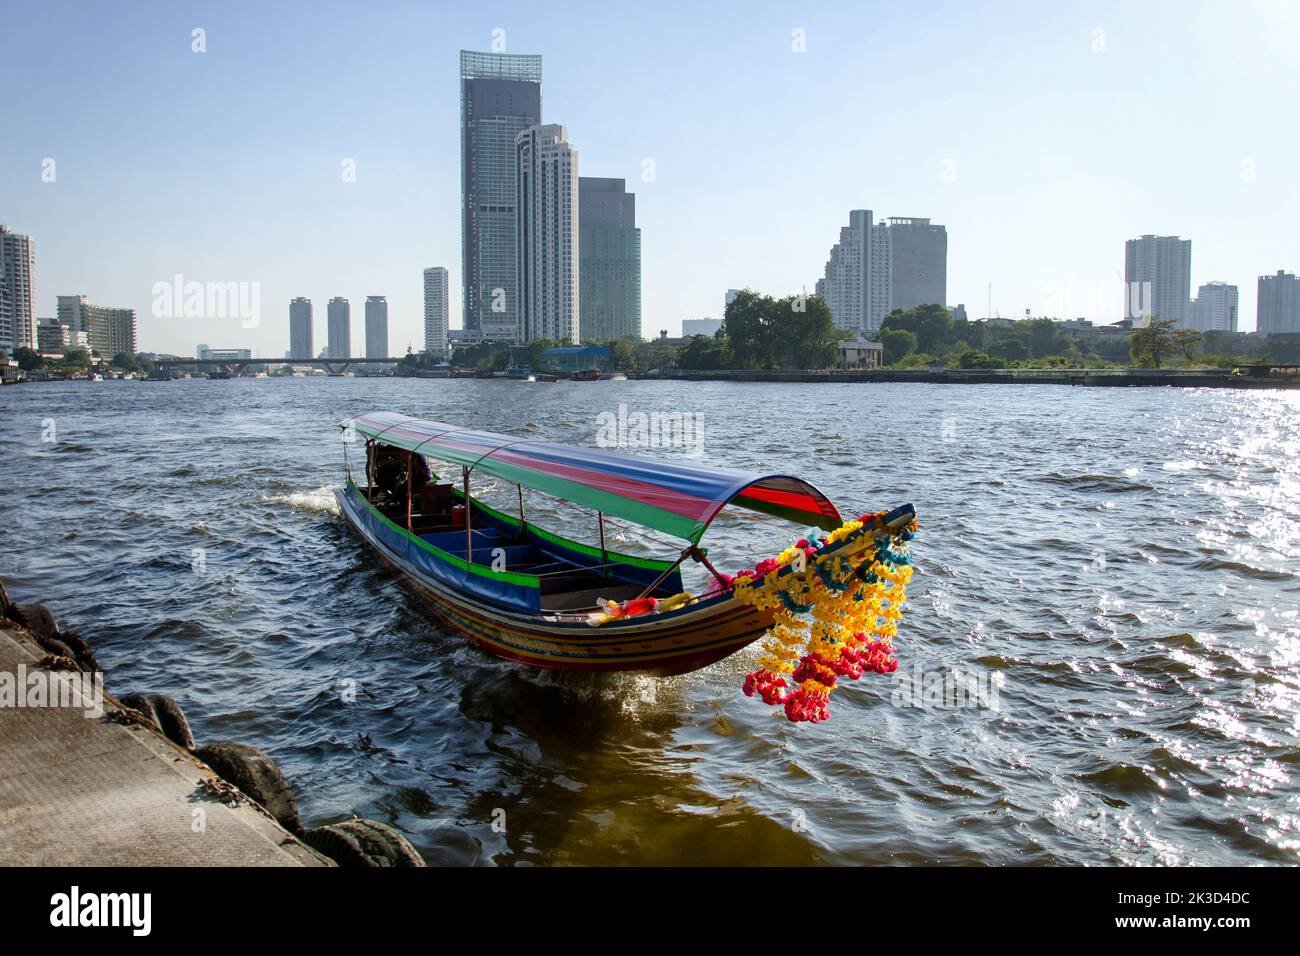 Traditional colorful long-tail boat sailing on the Chao Phraya river surrounded by modern skyscrapers in the background. Stock Photo